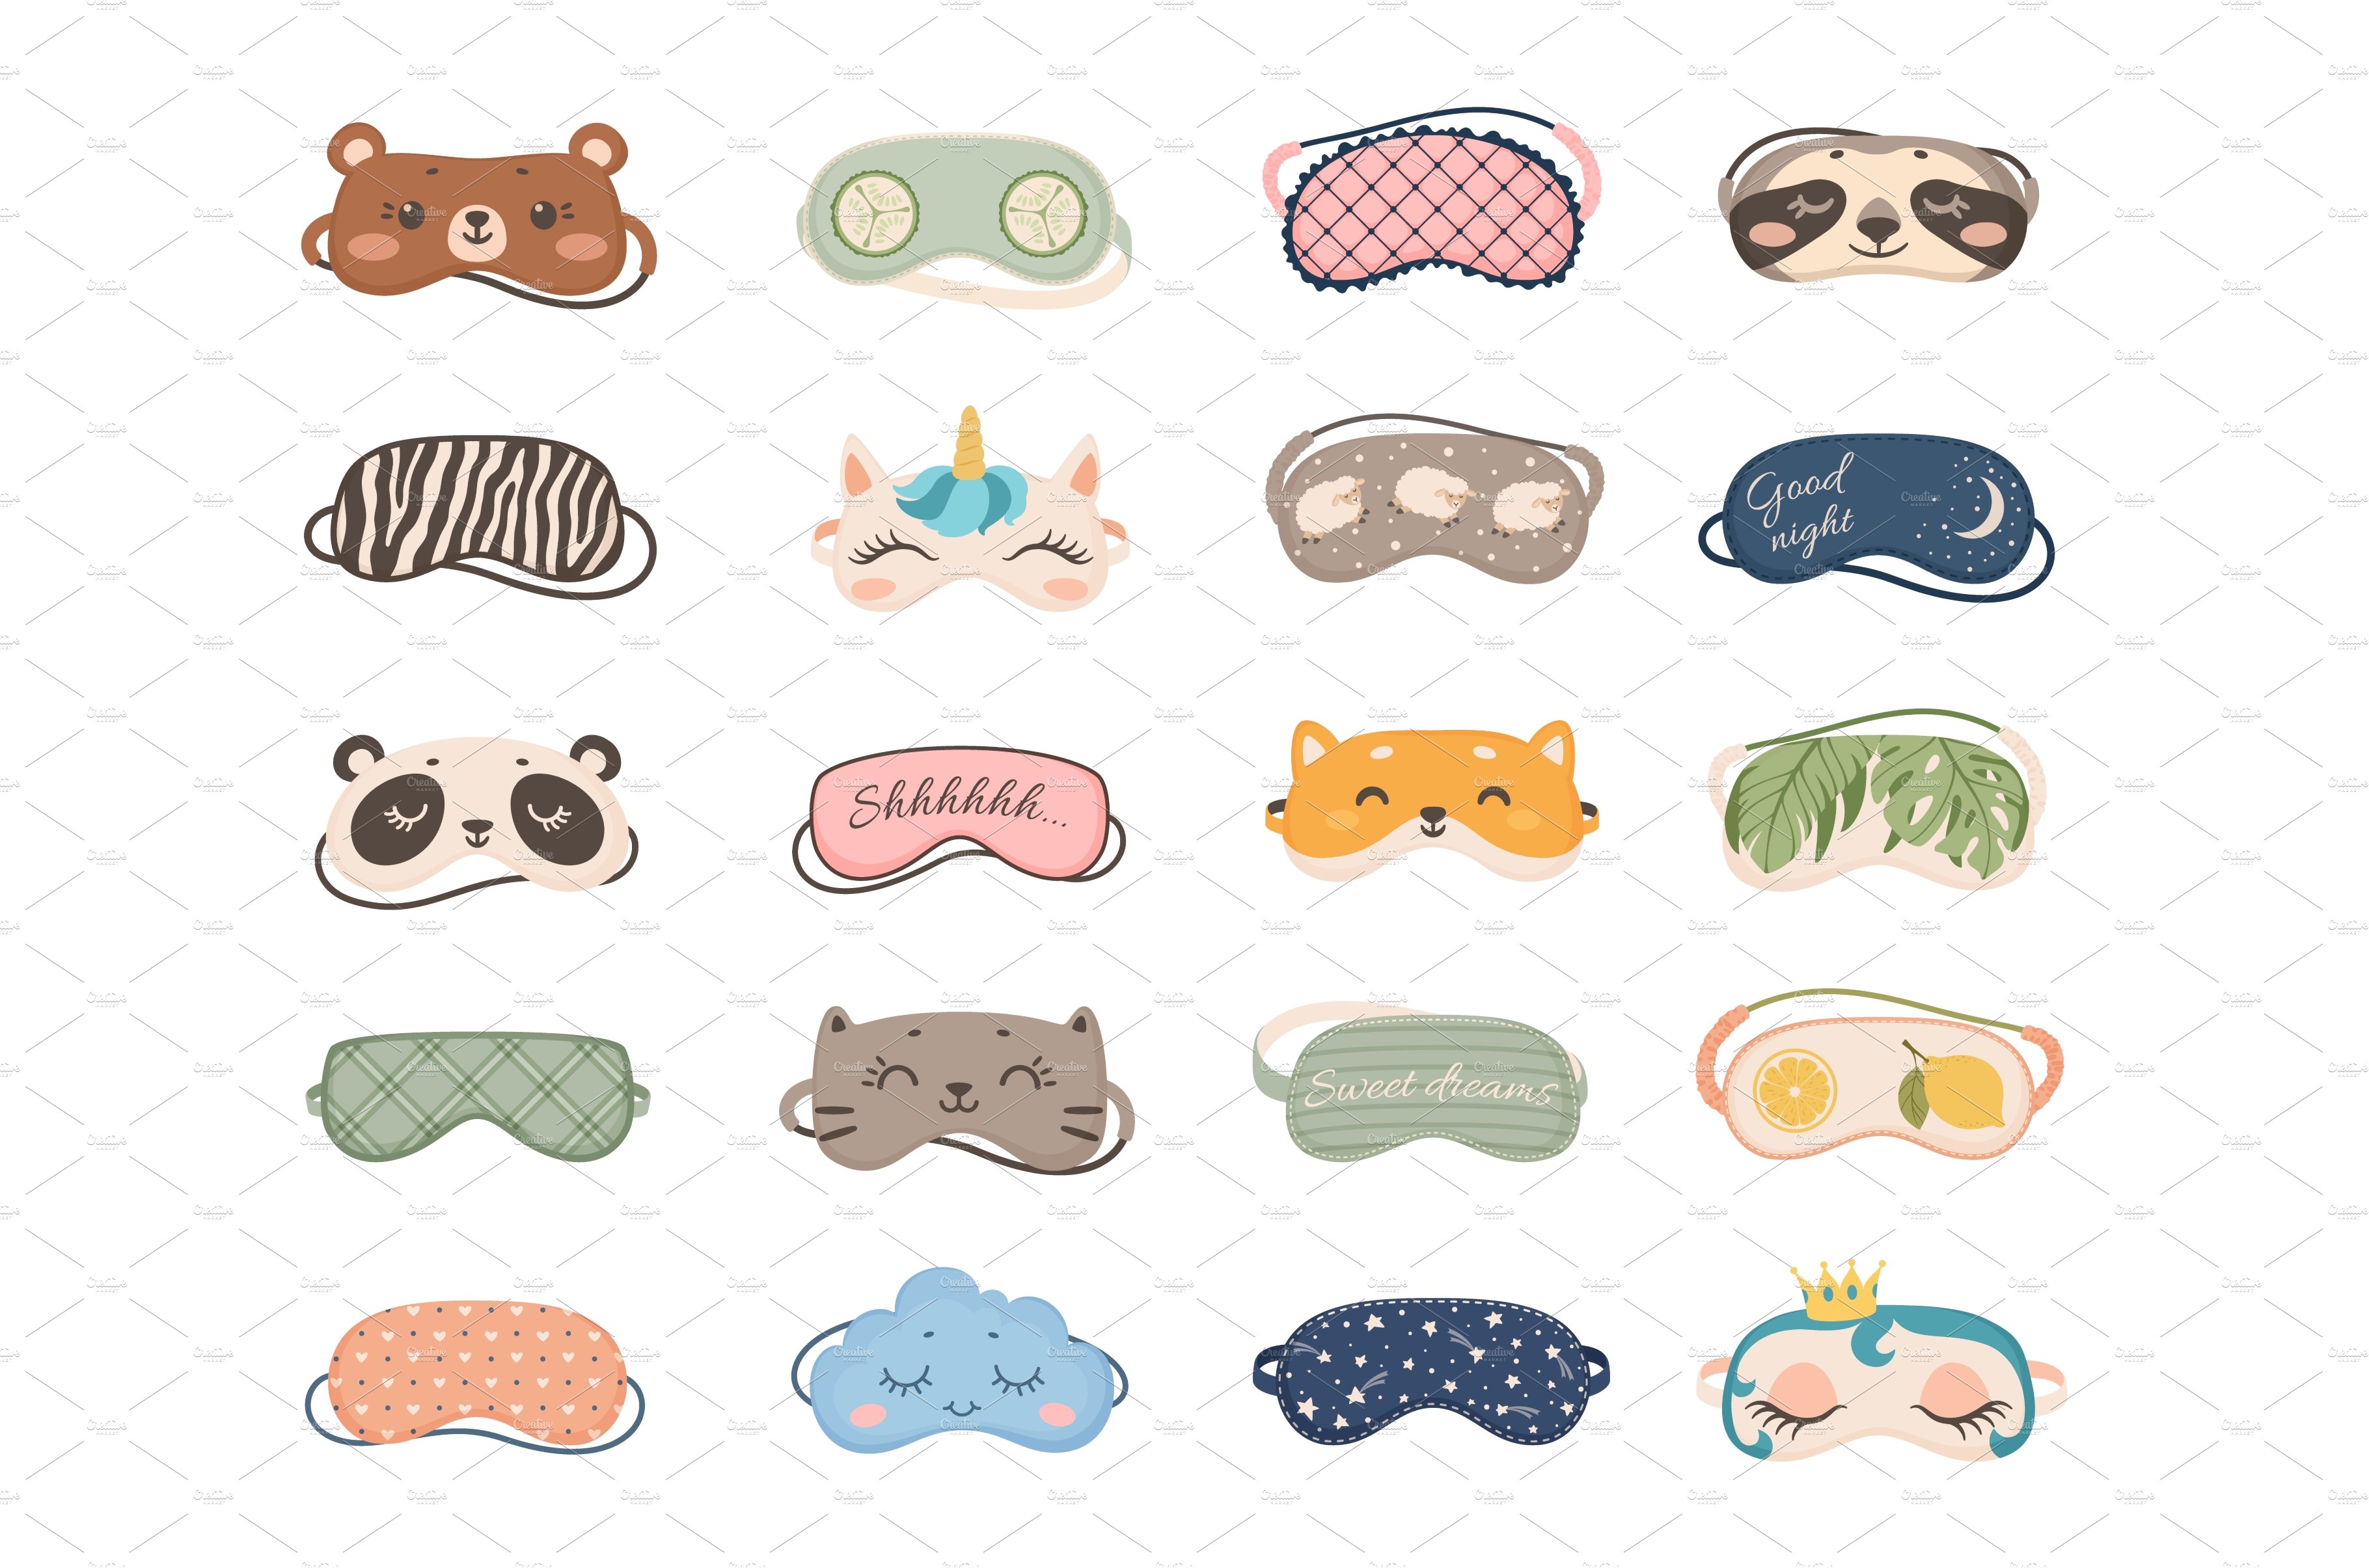 Cute sleeping masks with animals and cover image.